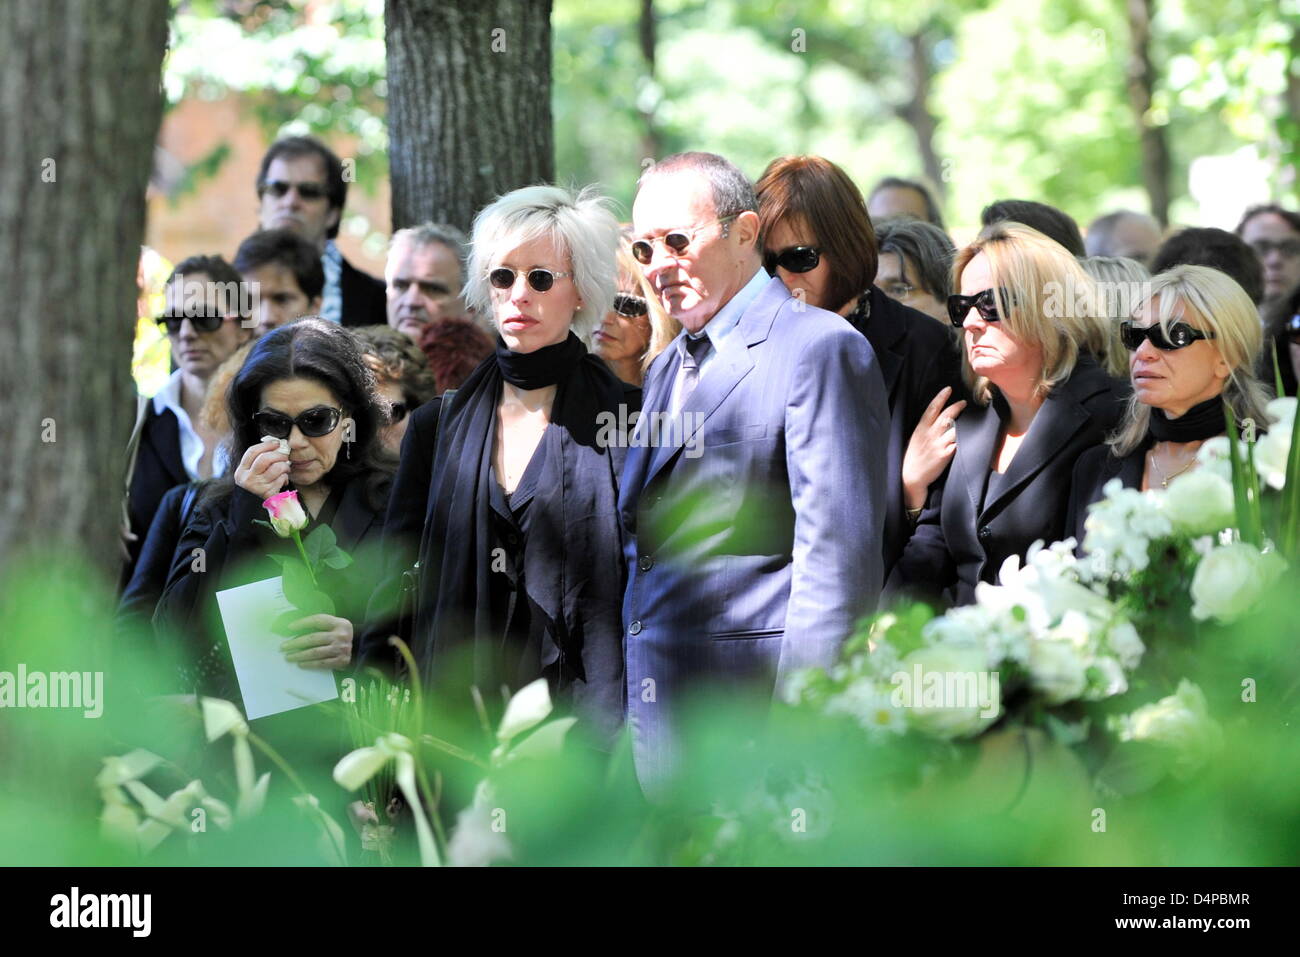 Actress Hannelore Elsner (front, L), director Bernd Eichinger (3-L) and his wife Katja (C) stand in front of the grave during the funeral of actress Barbara Rudnik in Munich, Germany, 29 May 2009. Rudnik passed away aged 50 on 23 May 2009 after a long struggle against cancer. Photo: Ursula Dueren Stock Photo